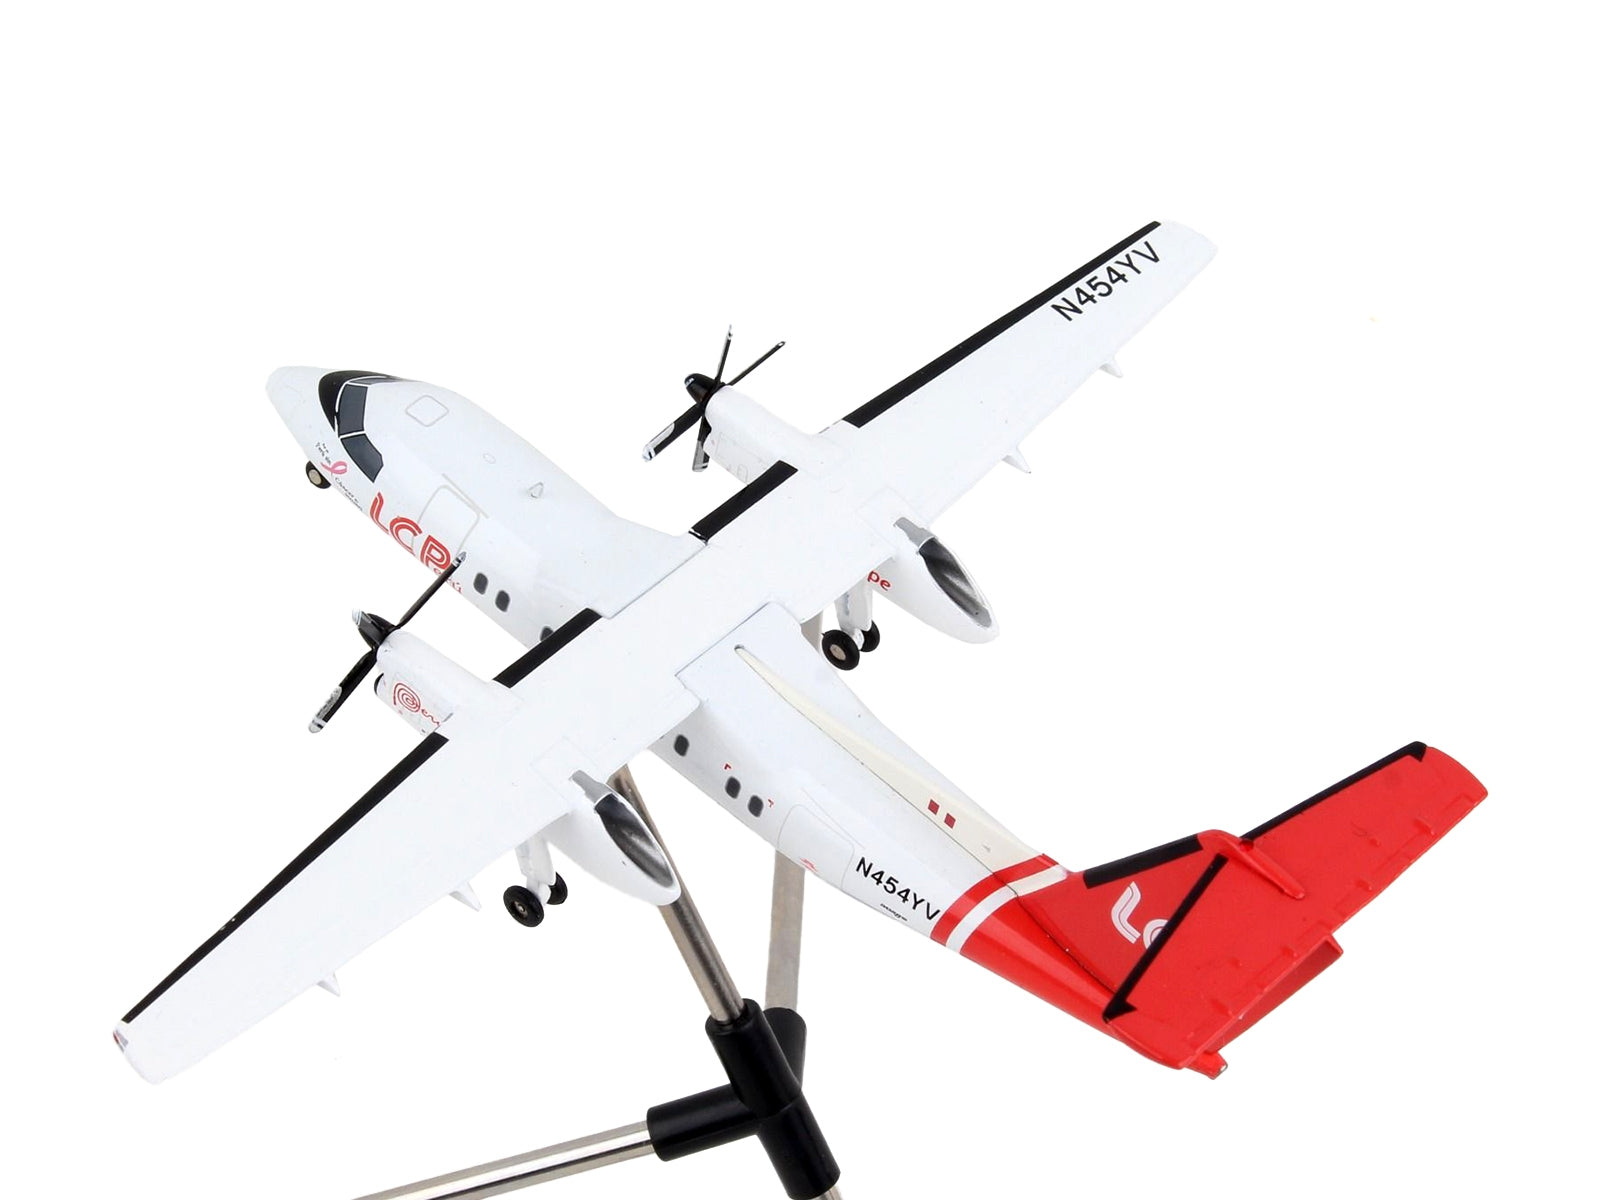 Bombardier Dash 8-200 Commercial Aircraft "LC Peru" White with Red Tail "Gemini 200" Series 1/200 Diecast Model Airplane by GeminiJets GeminiJets